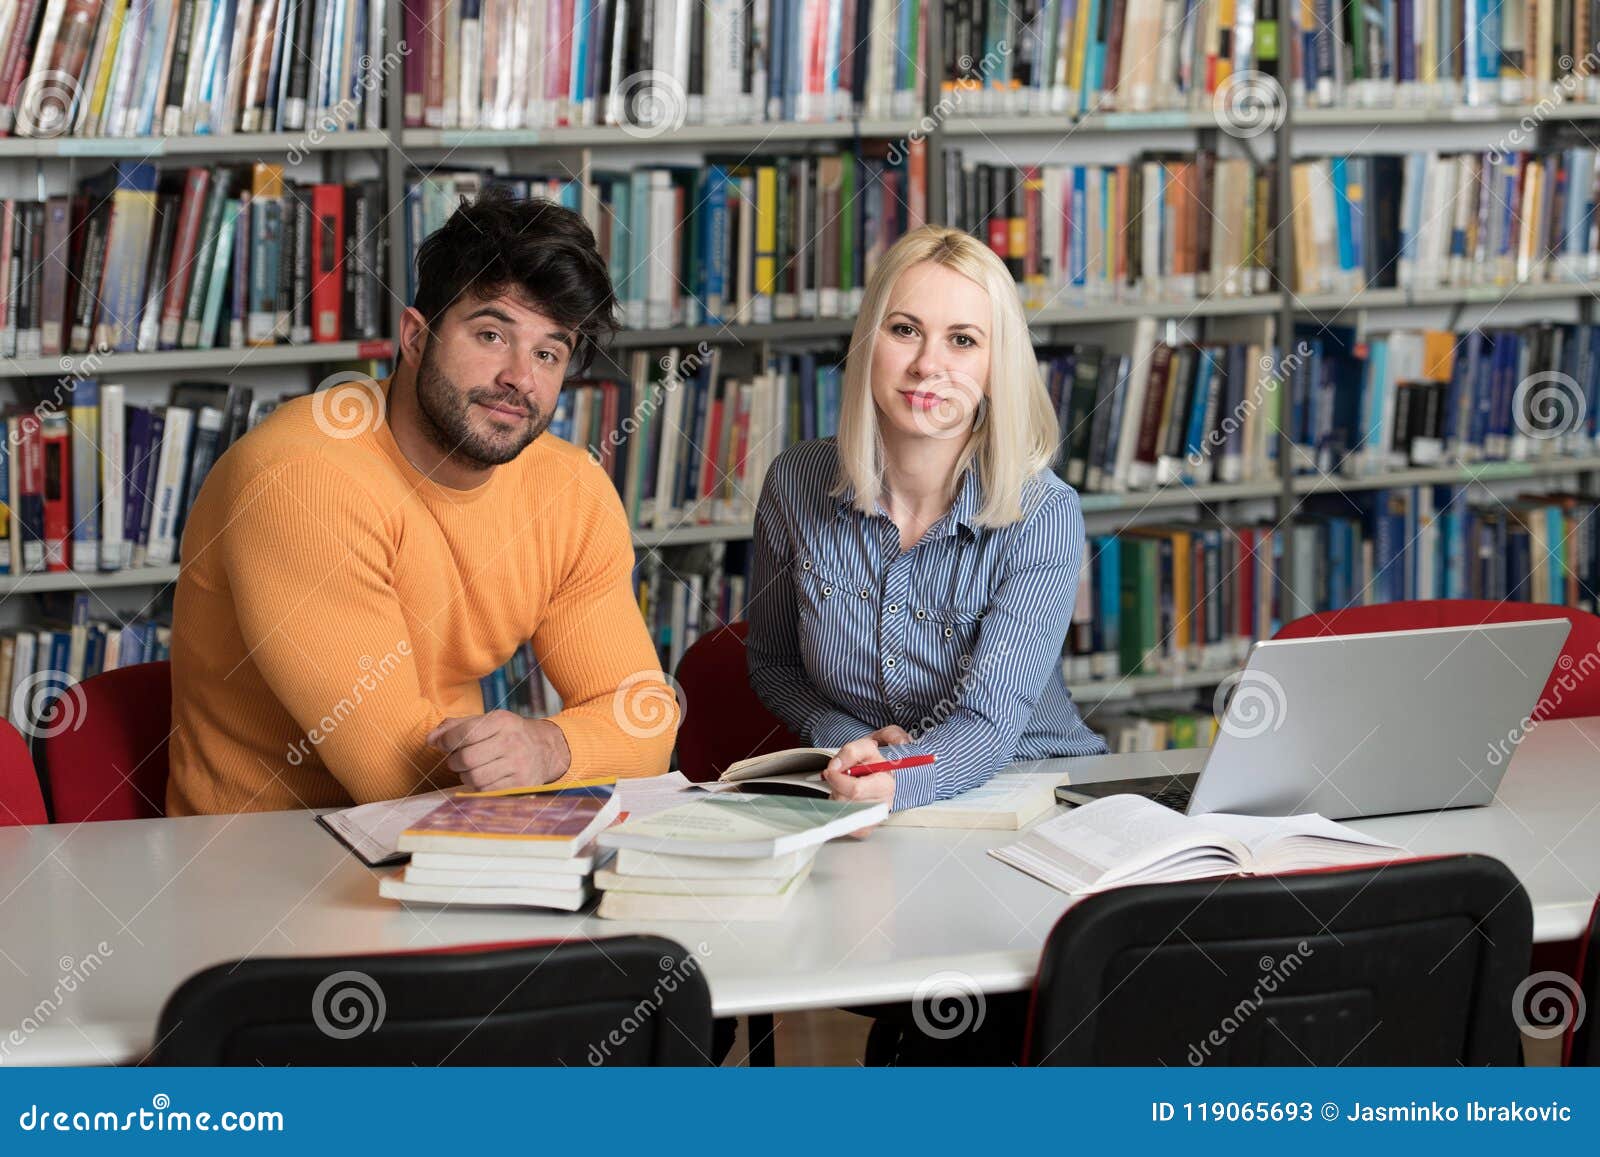 Couple Of Students With Laptop In Library Stock Image Image Of Blond